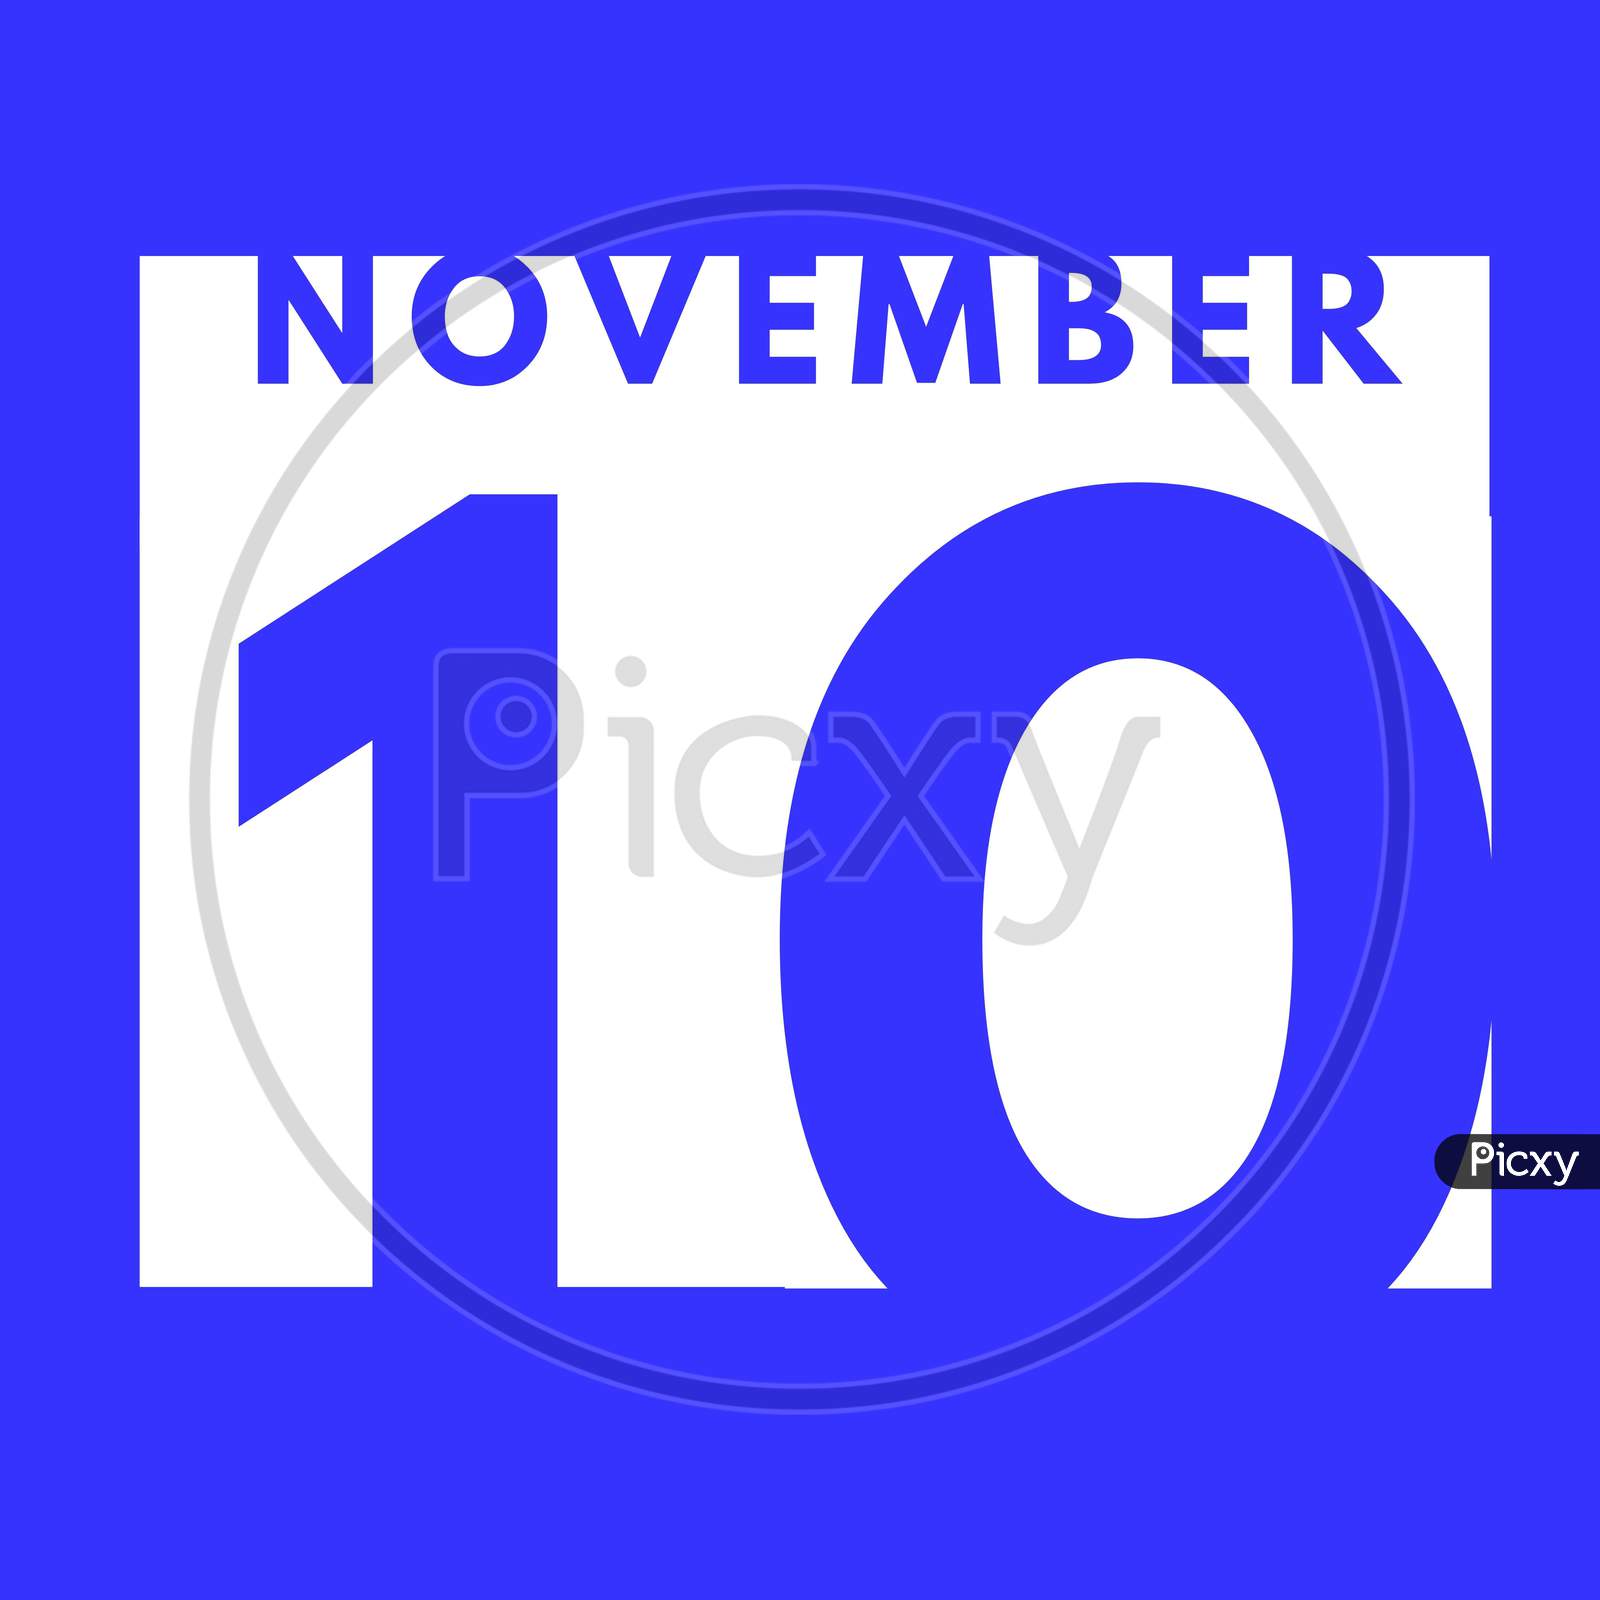 November 10 . Flat Modern Daily Calendar Icon .Date ,Day, Month .Calendar For The Month Of November